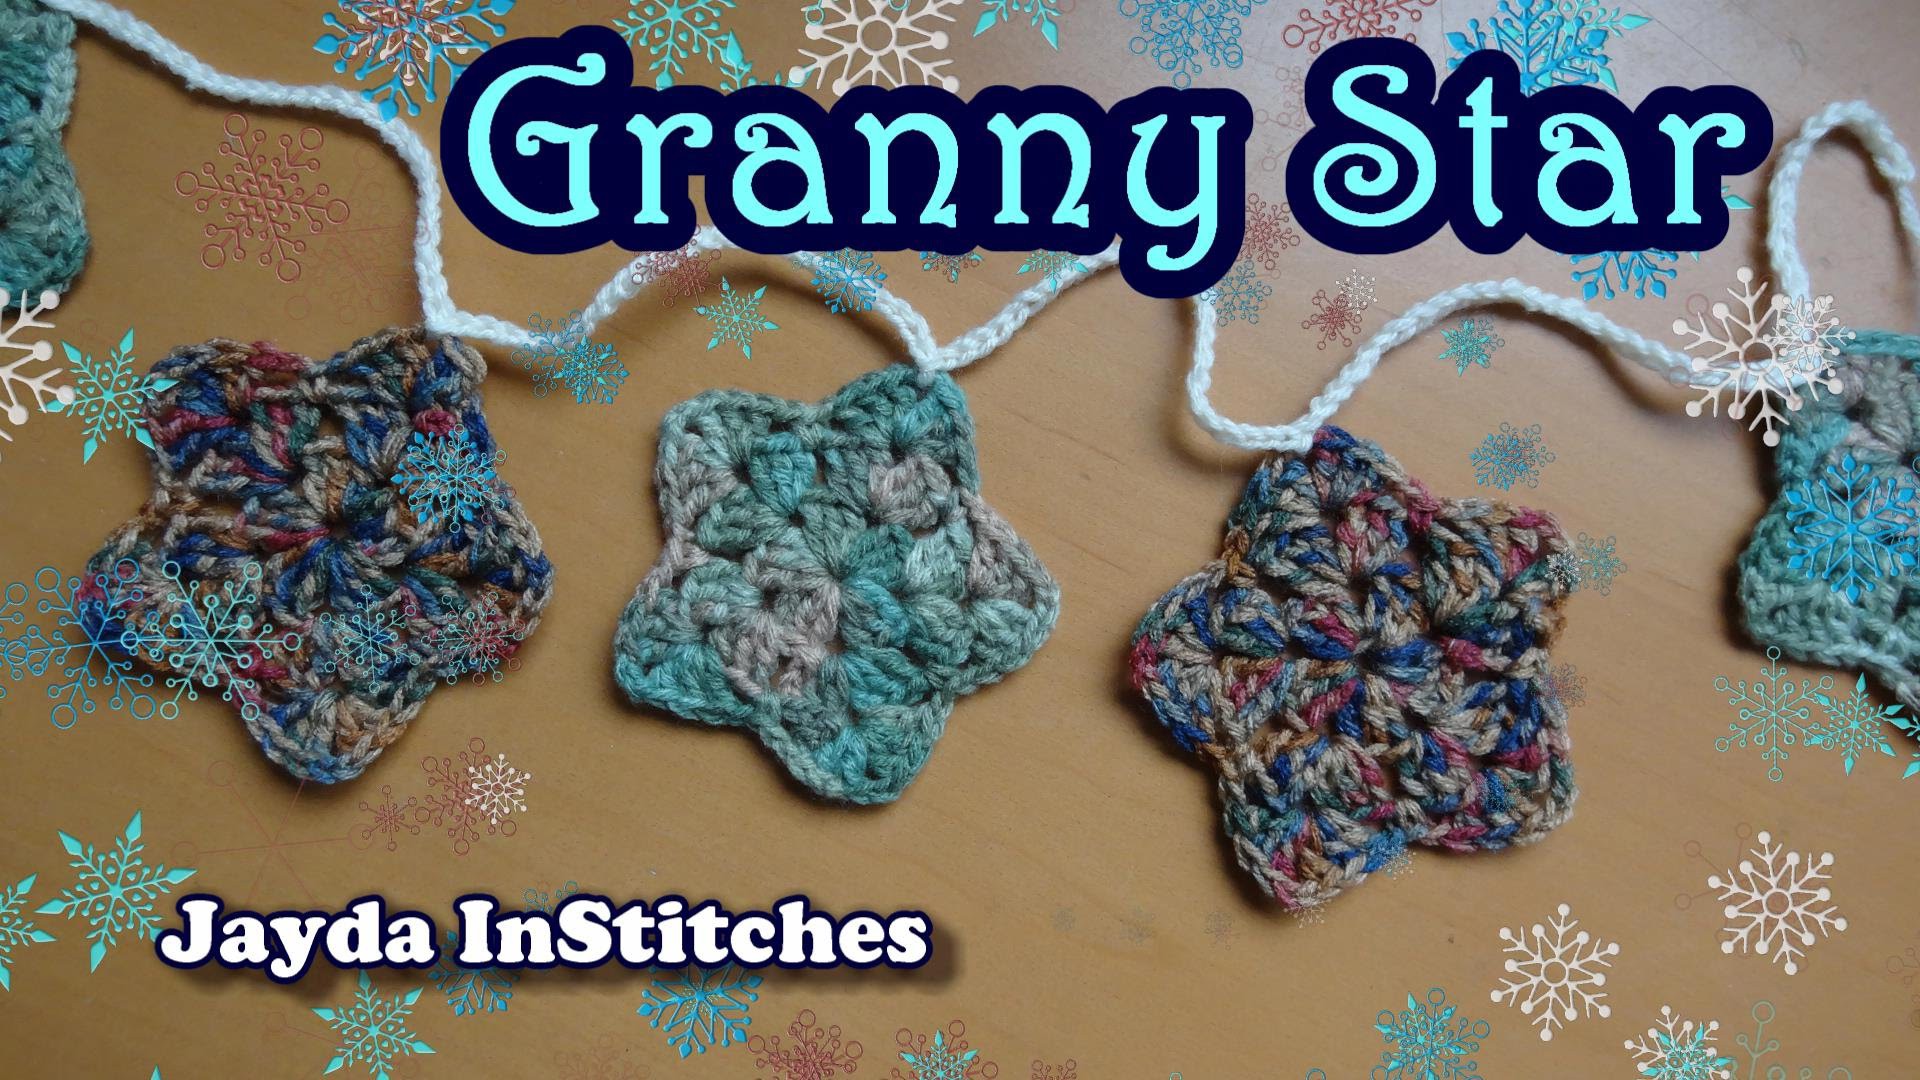 How To Crochet a Granny Star and Make a Garland!